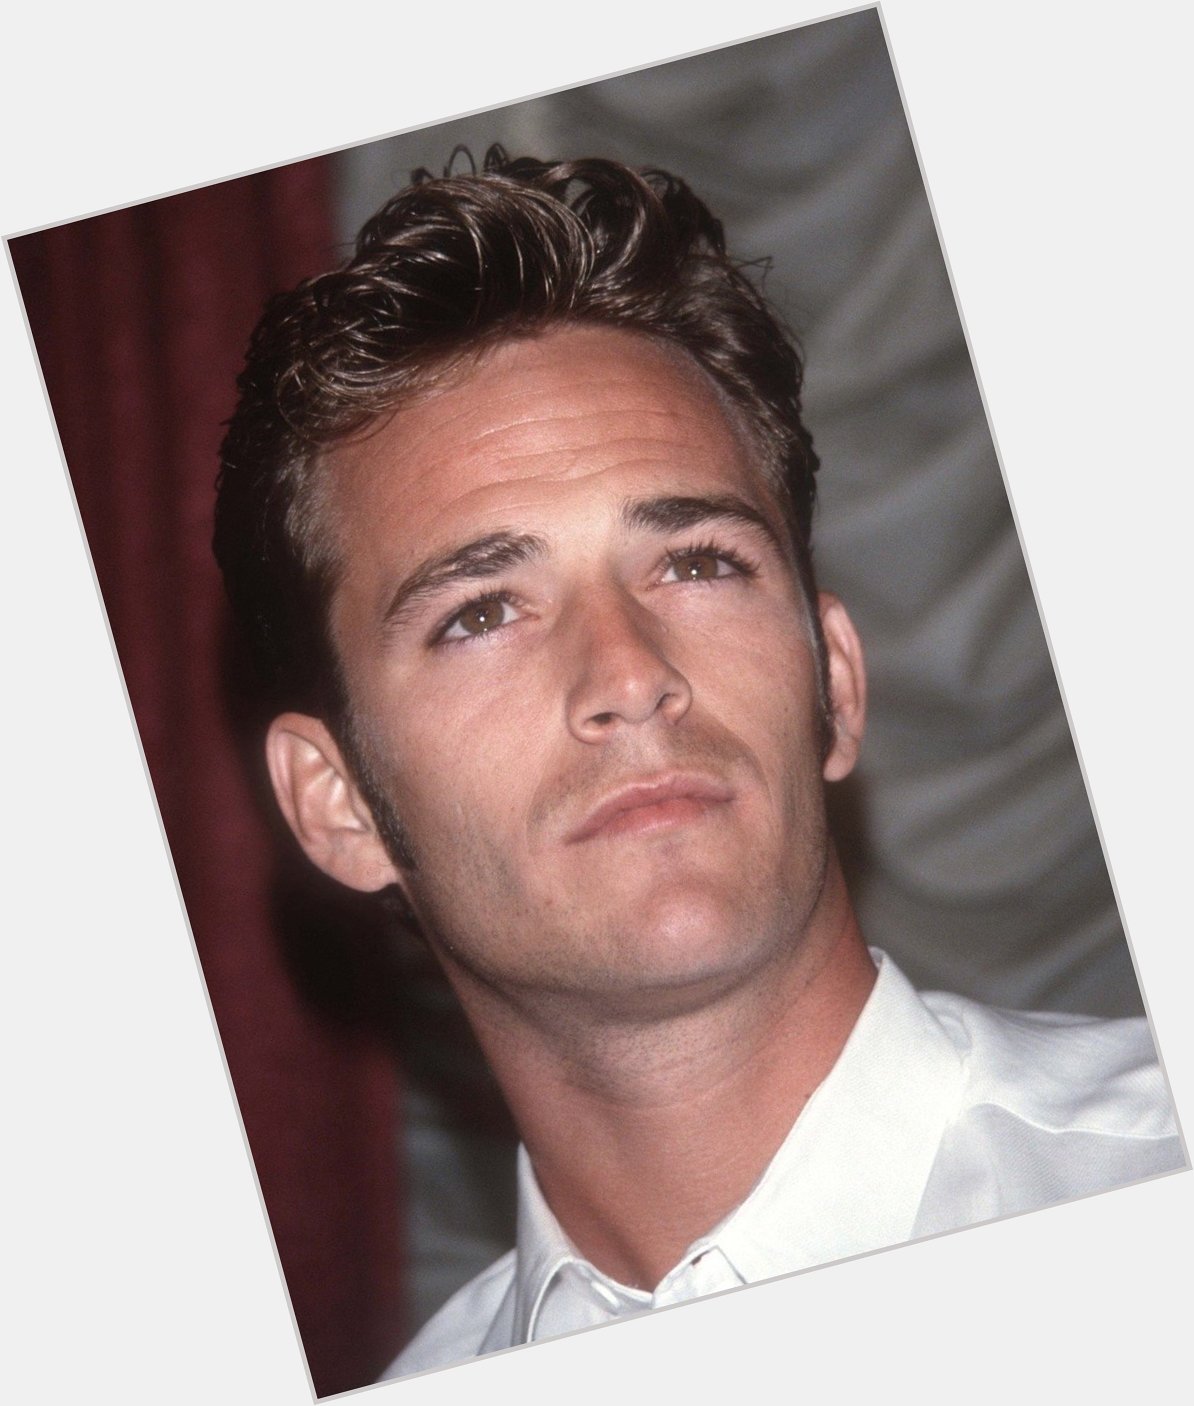 Some people make the world special just by being in it, happy birthday to a true icon Luke Perry! 